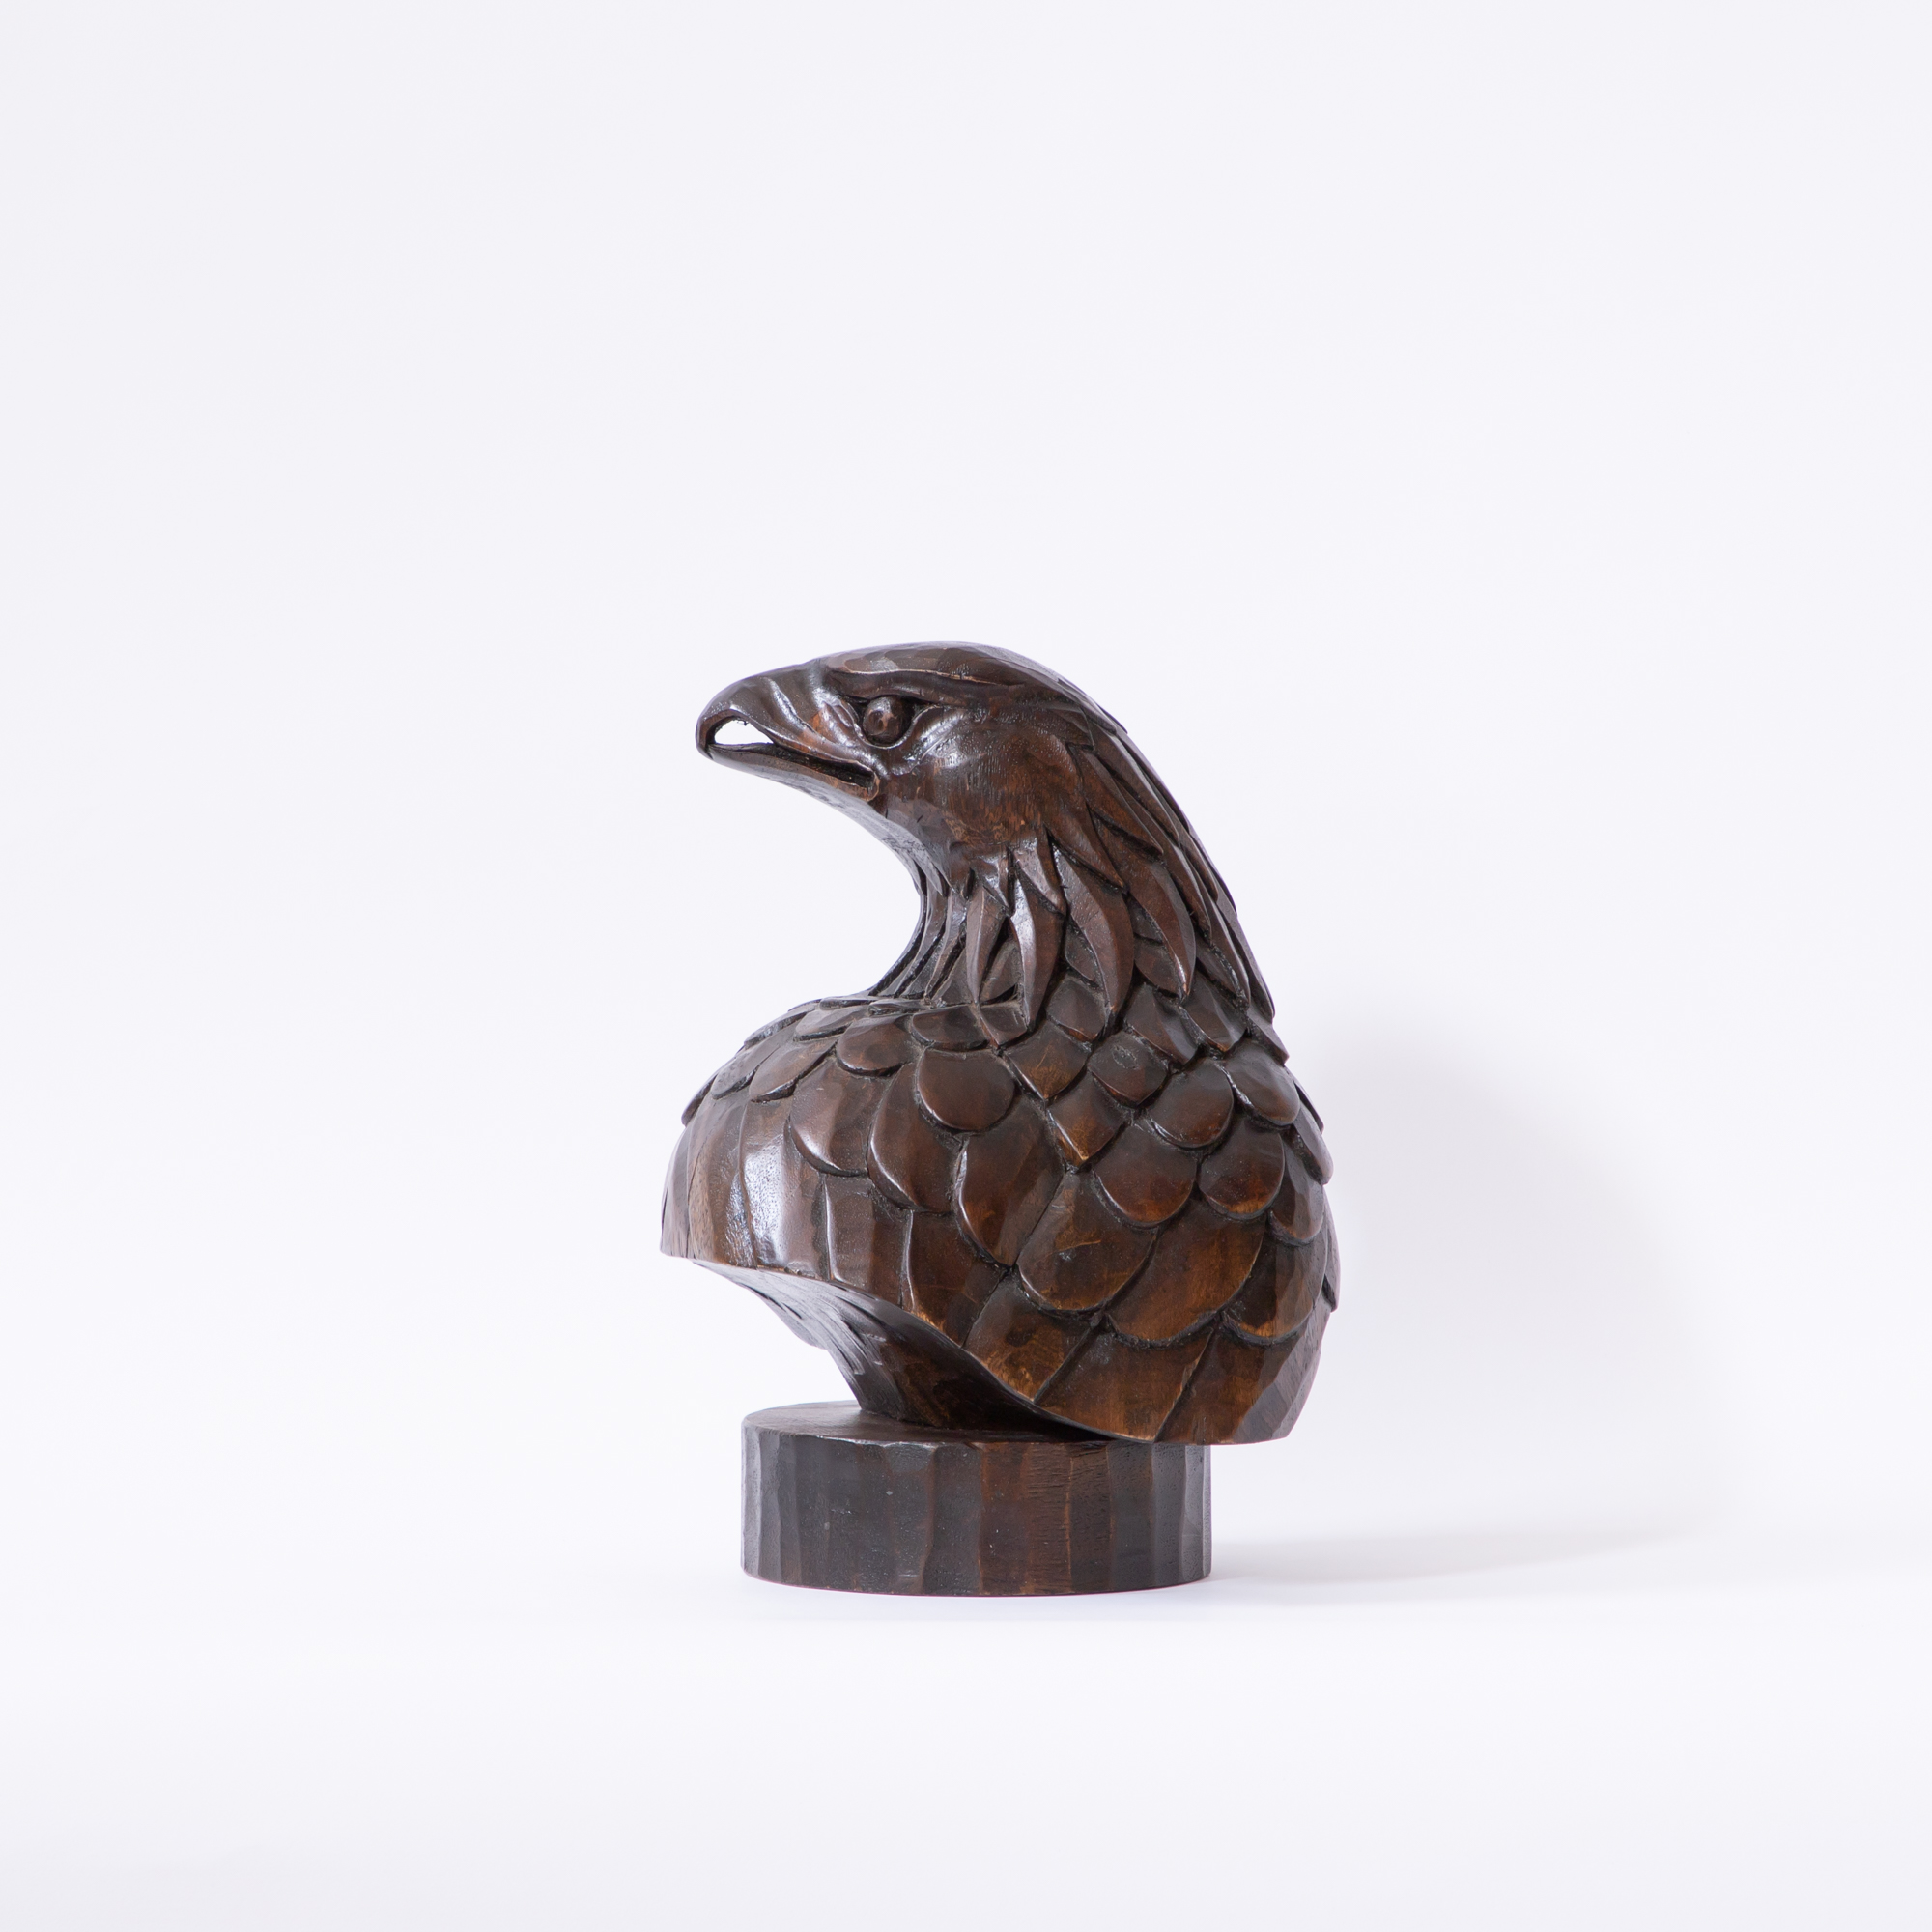 Himalayan Golden Eagle Solid Wood Decor Object